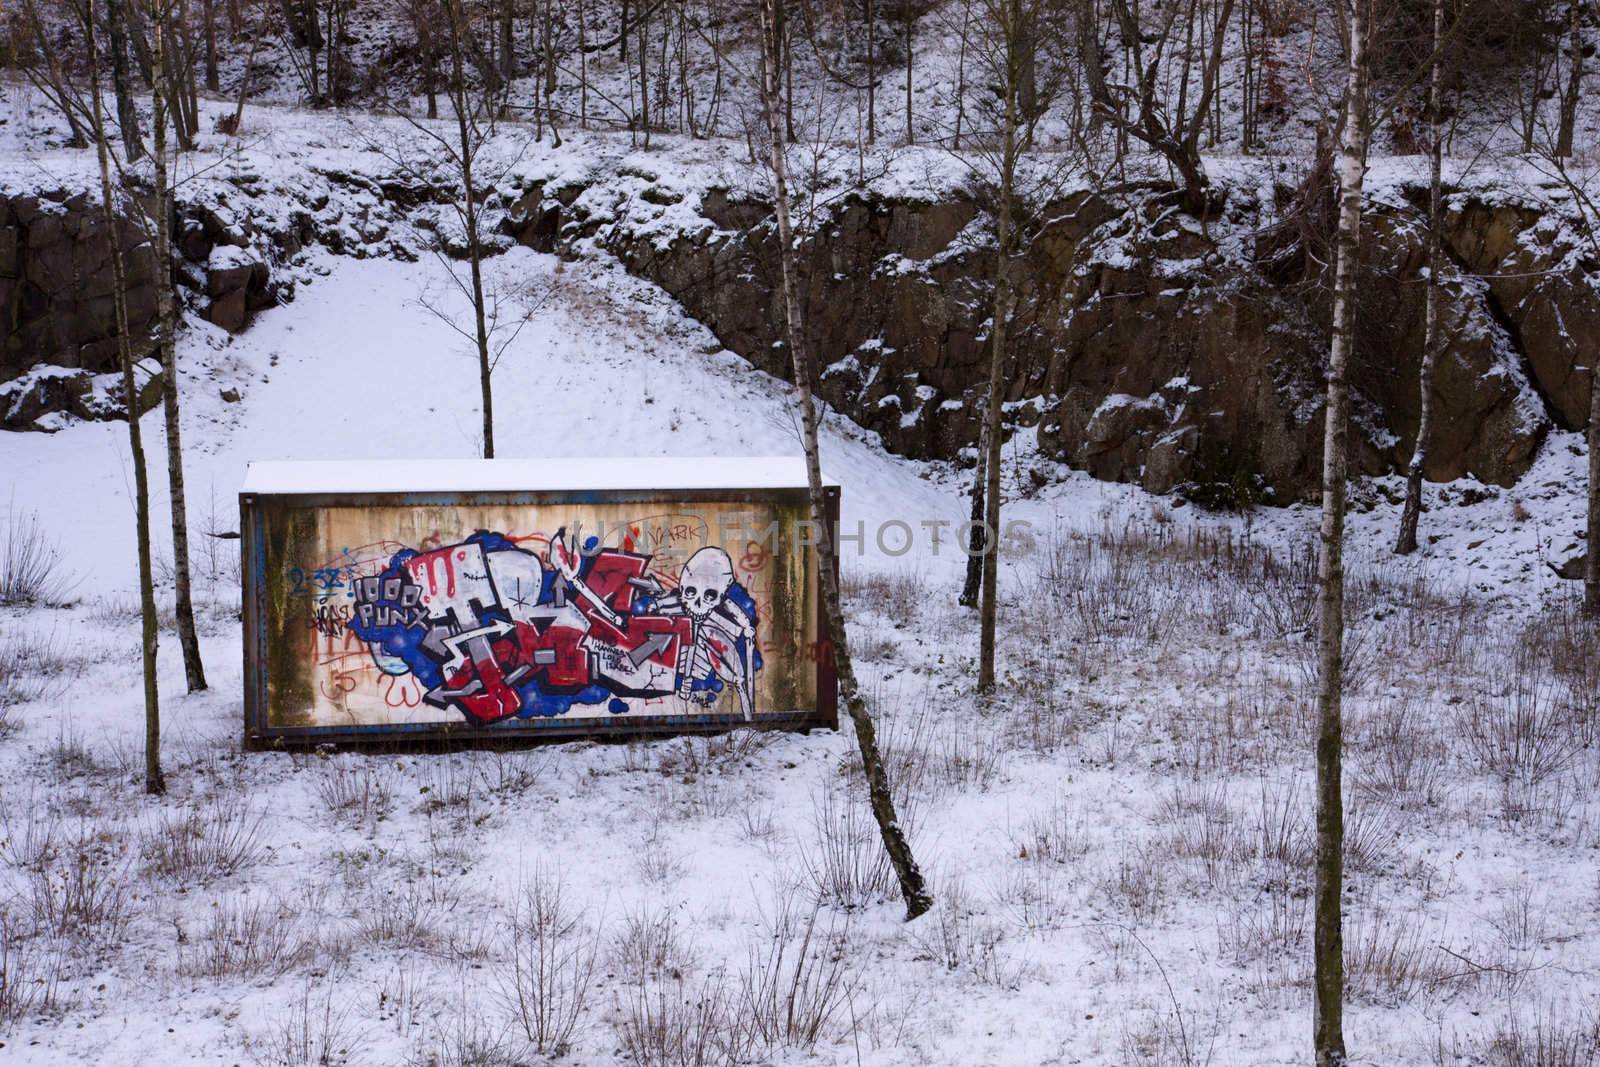 Contrast between a container with graffiti and its natural setting